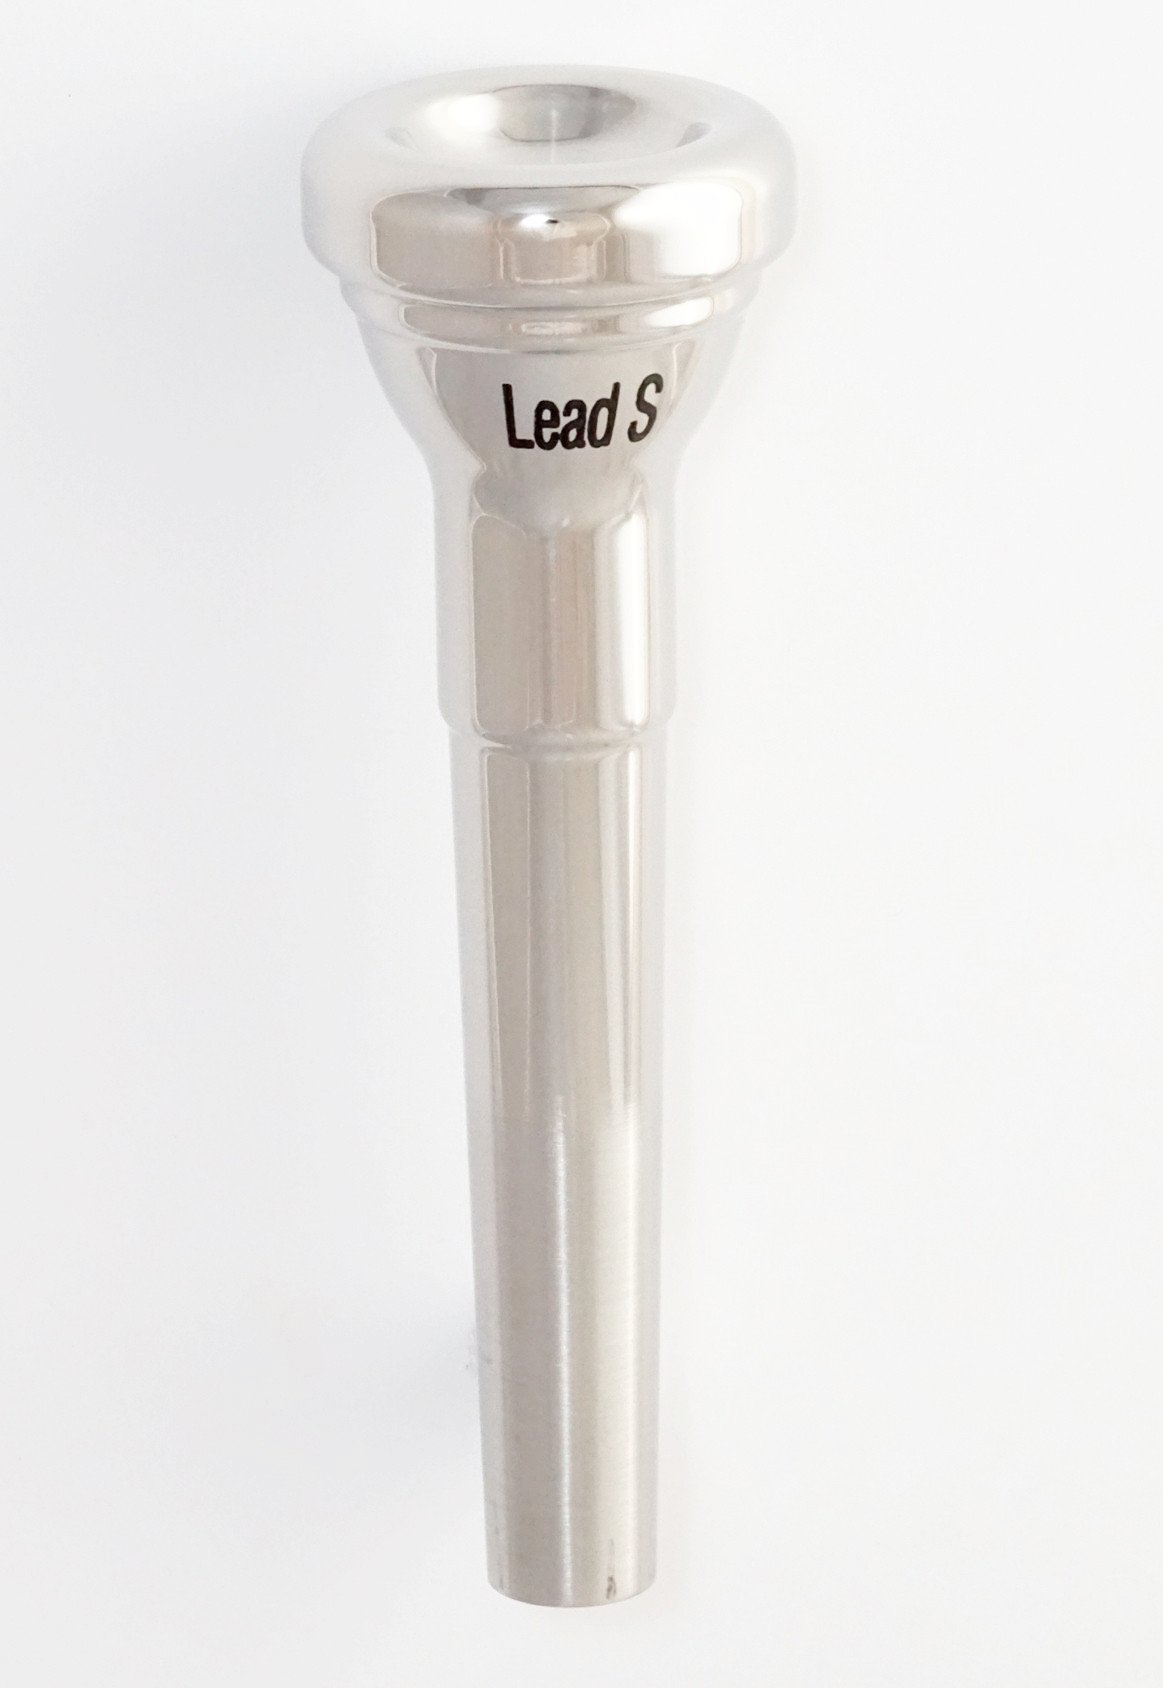 Jazz Lead Trumpet Mouthpieces - Giddings Mouthpieces